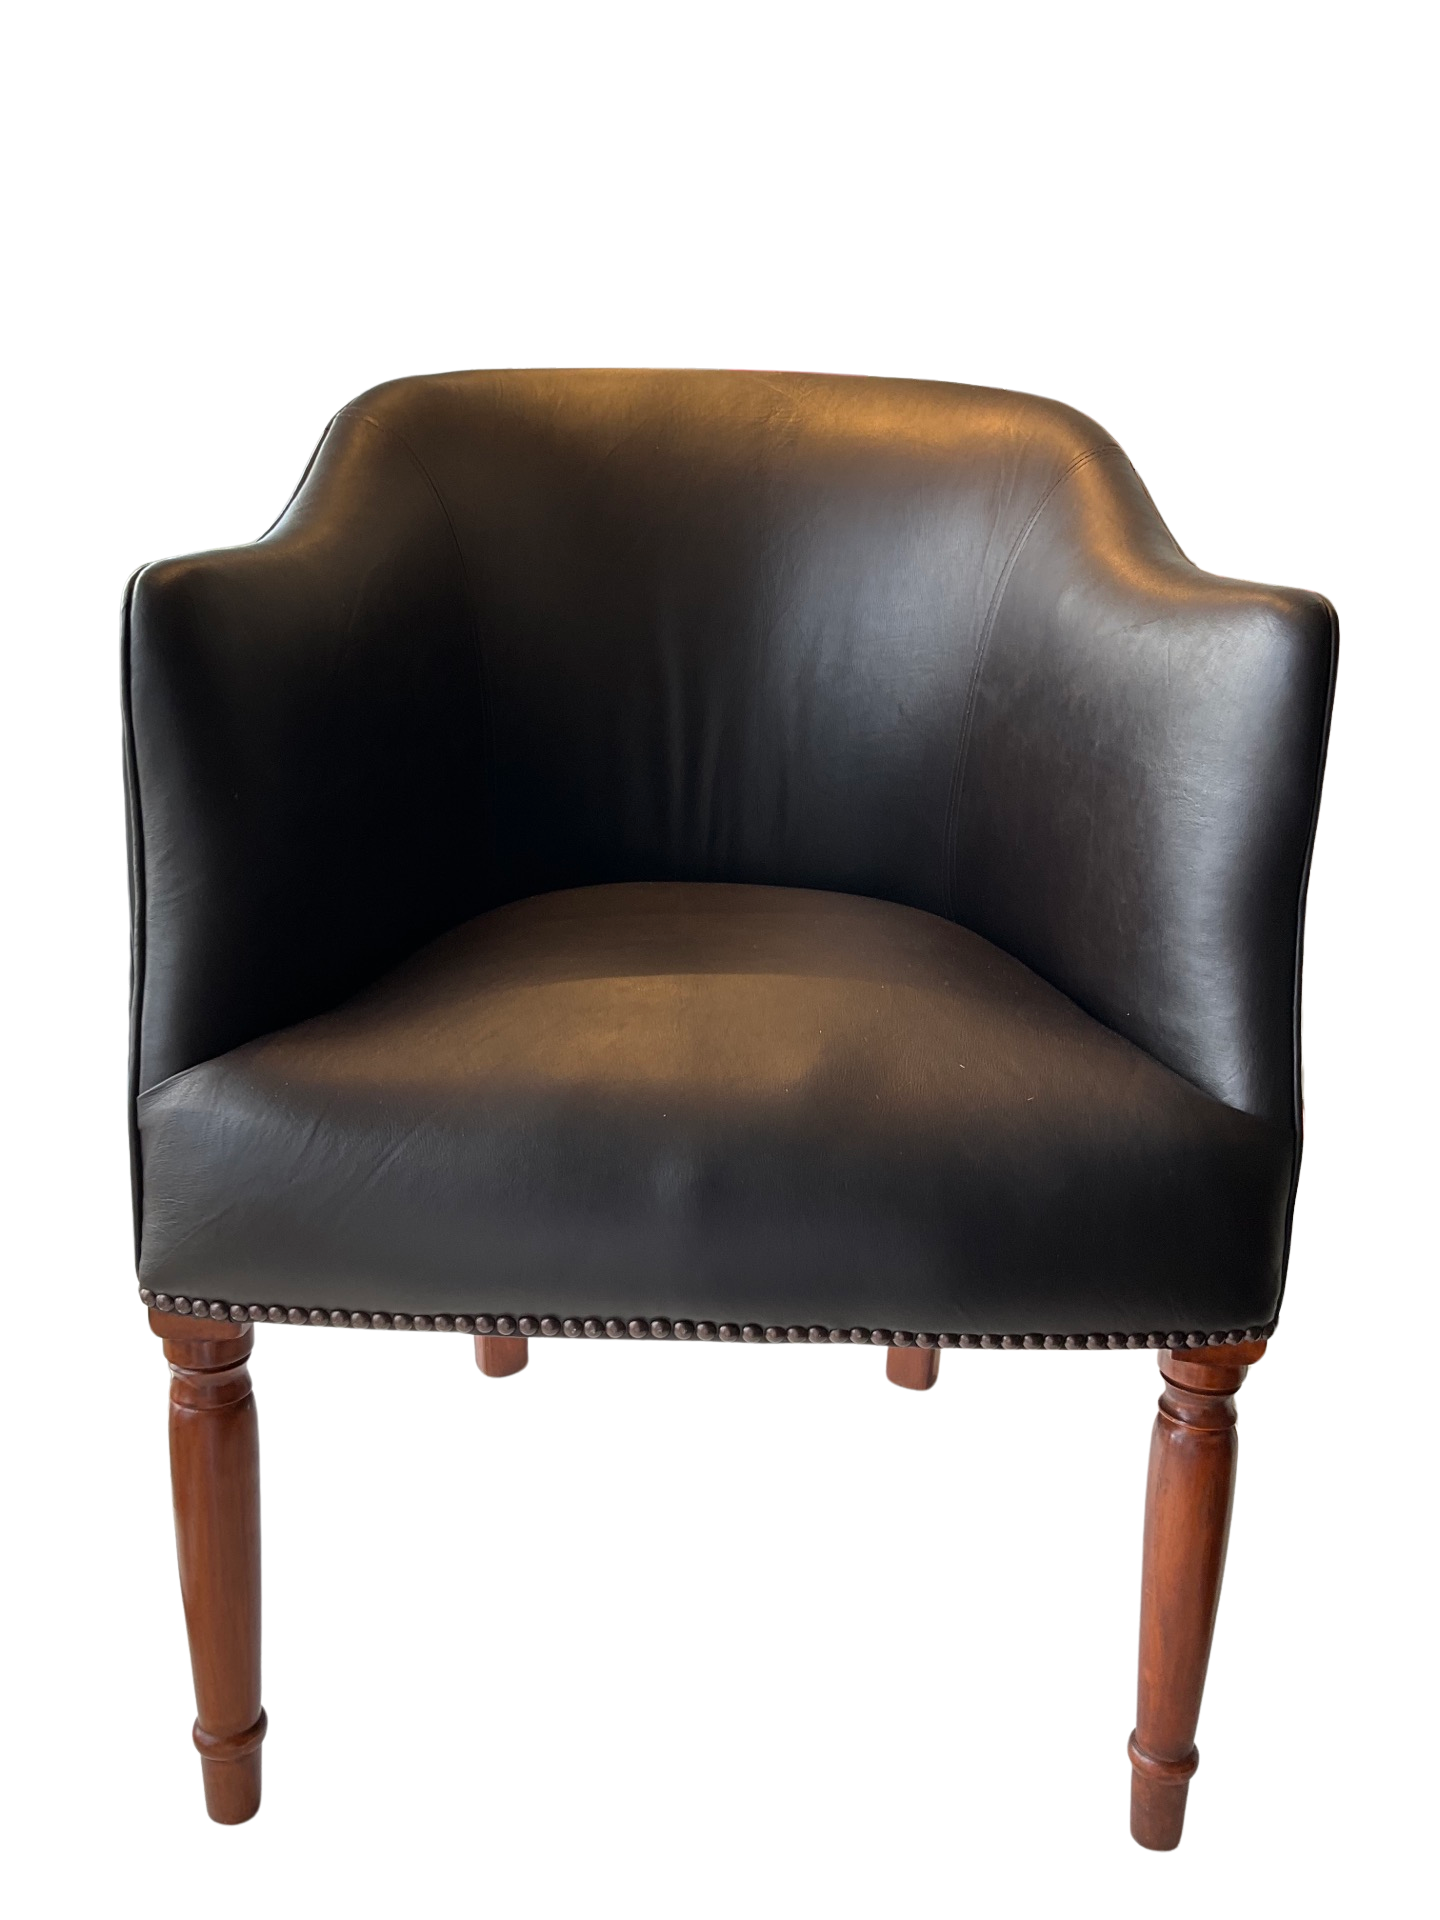 London Libary Chair with New Zealand Calf Skin Leather - the prince of leathers